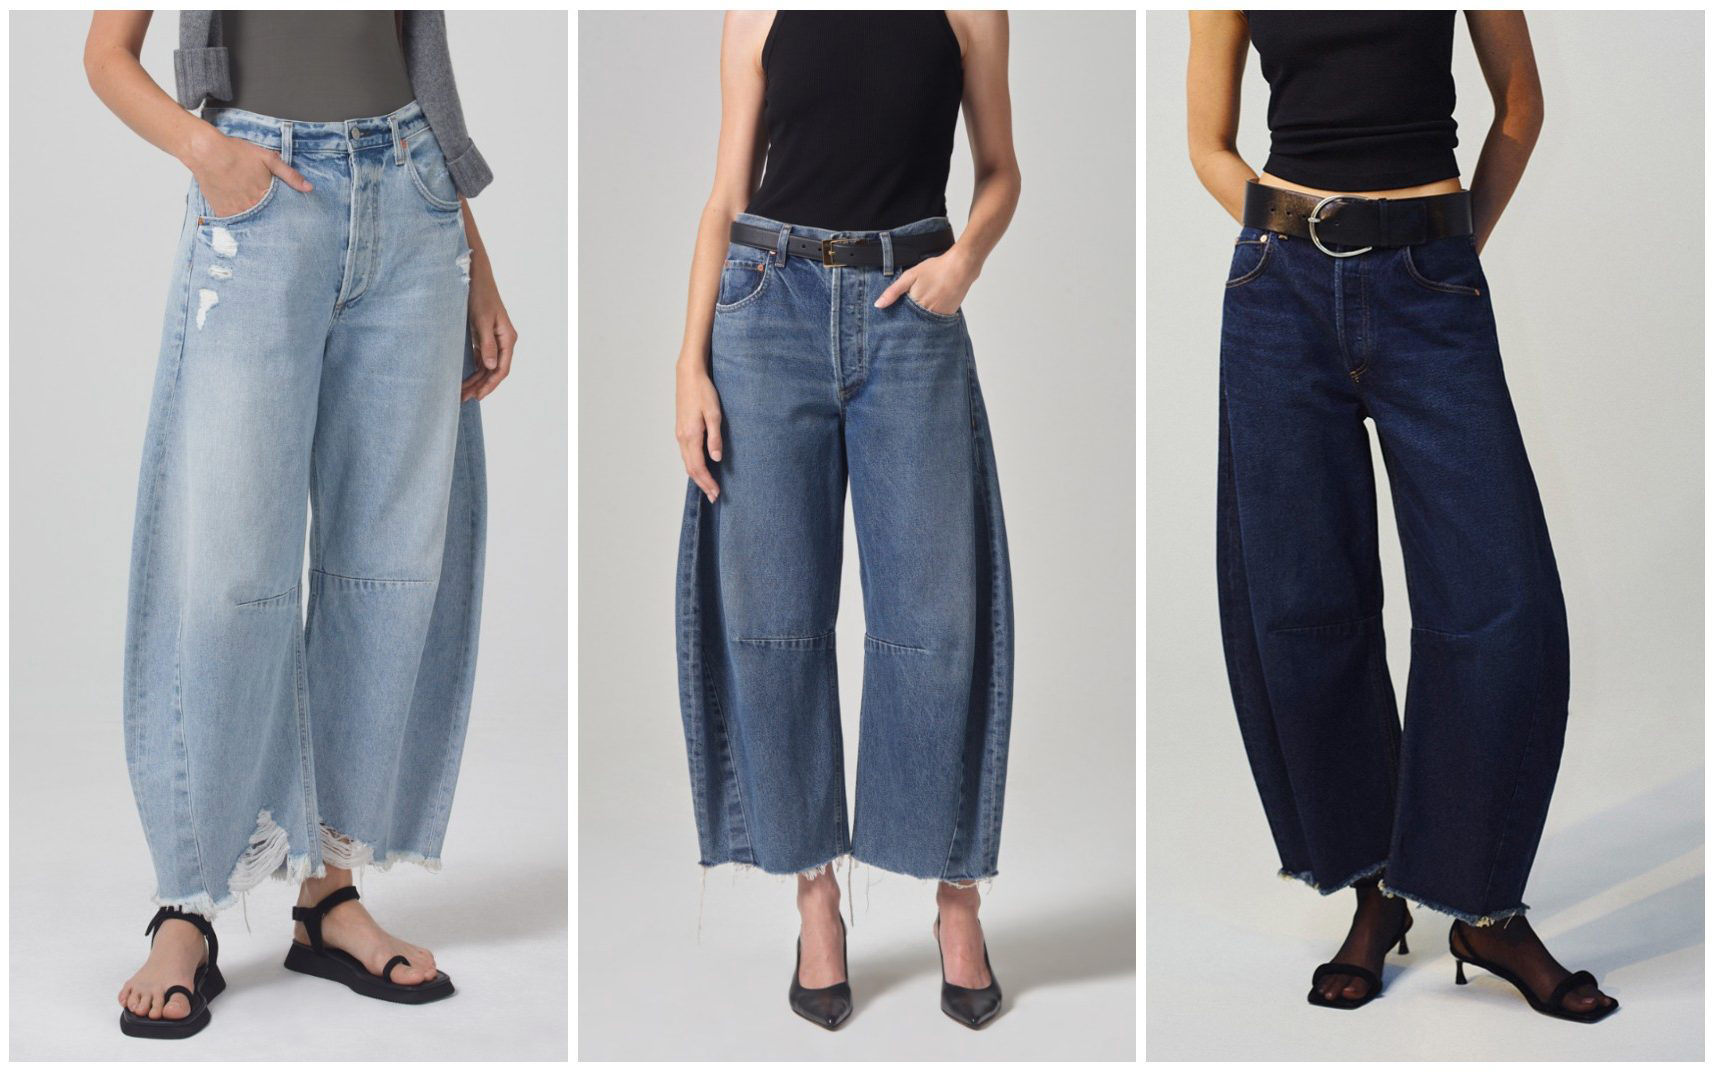 ‘Horseshoe’ jeans are fashion’s divisive new trend – would you wear them?